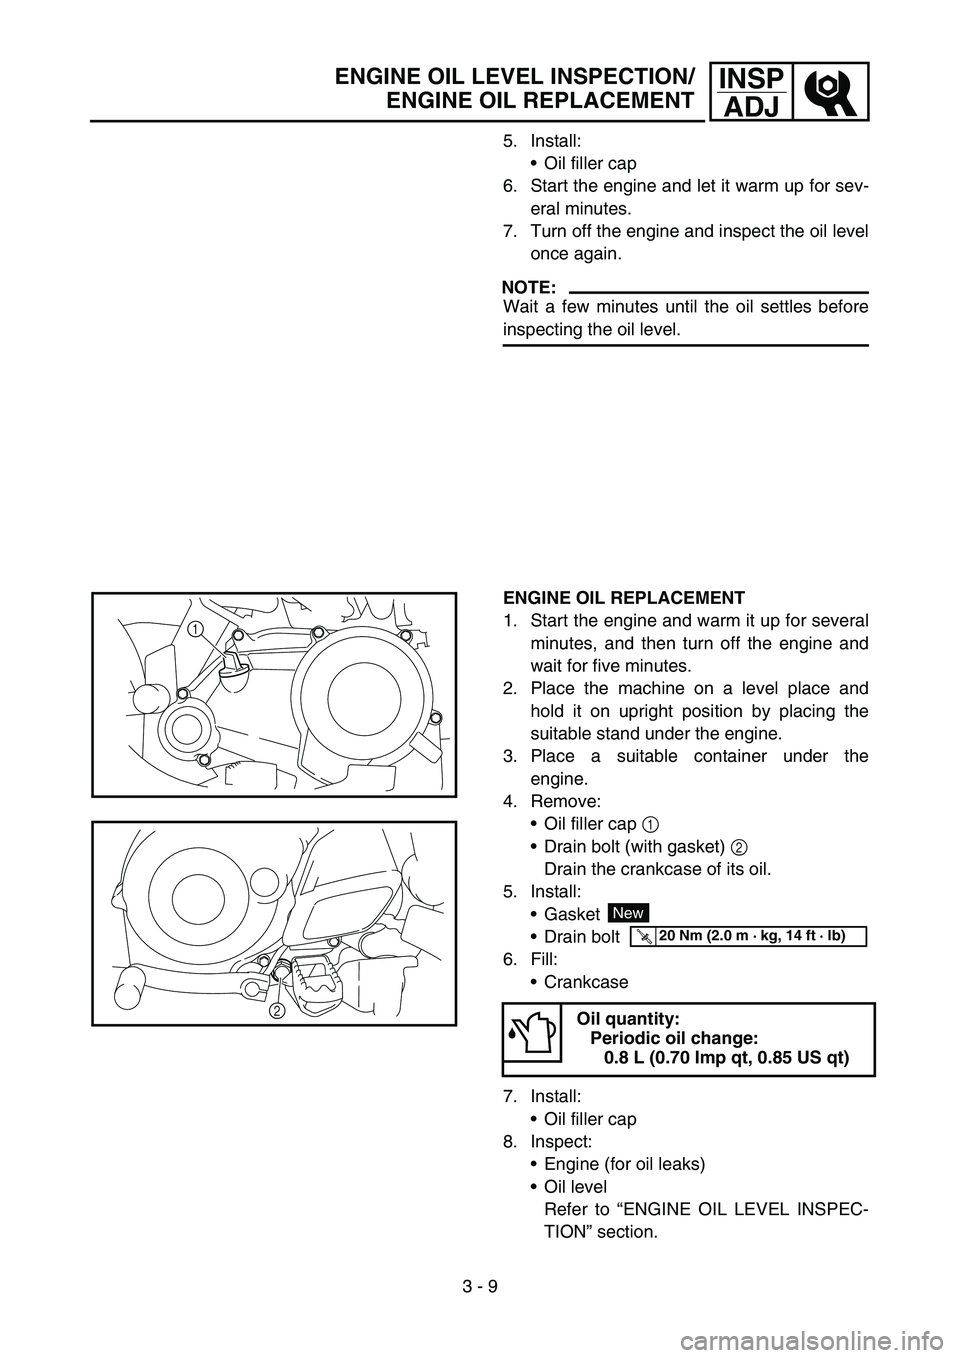 YAMAHA TTR50 2006  Owners Manual 
3 - 9
INSPADJENGINE OIL LEVEL INSPECTION/
ENGINE OIL REPLACEMENT
5. Install:
Oil filler cap
6. Start the engine and let it warm up for sev-
eral minutes.
7. Turn off the engine and inspect the oil l